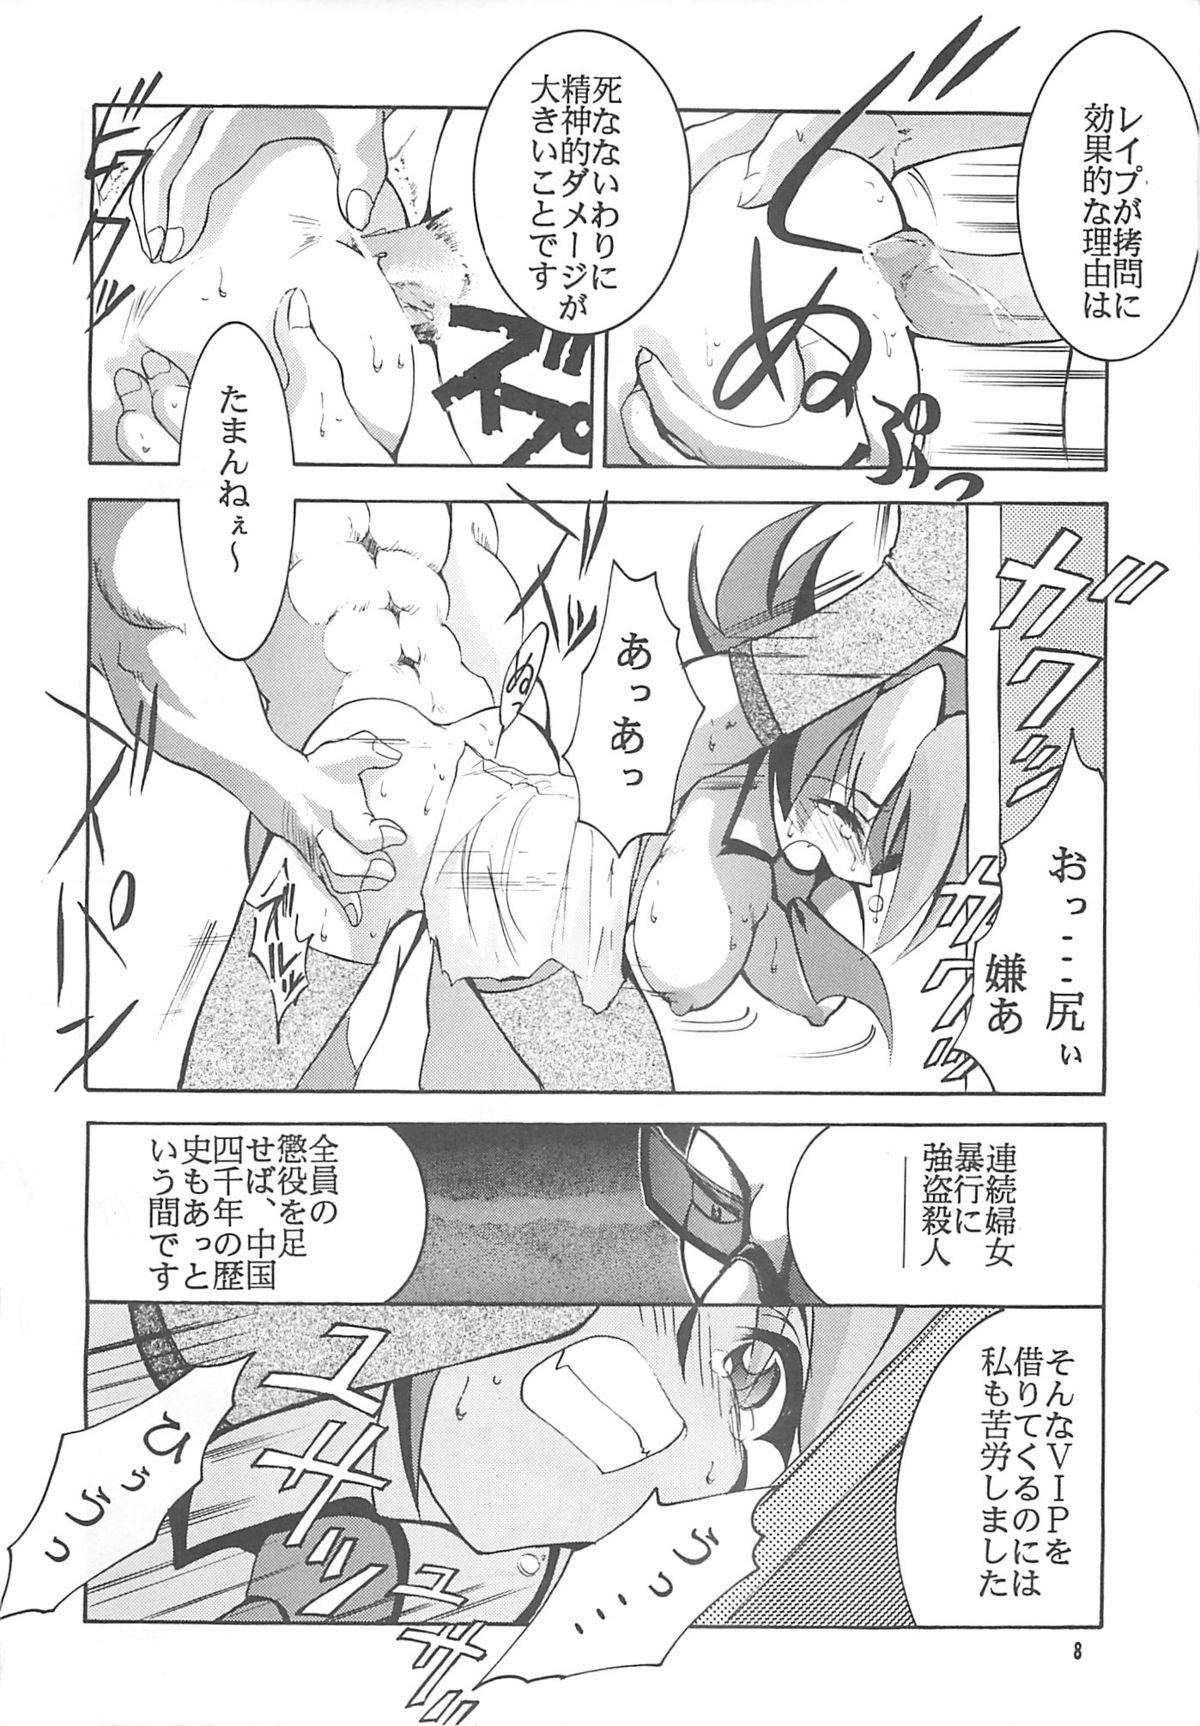 Calle TEN - Slayers Saber marionette Betterman Highschool - Page 7